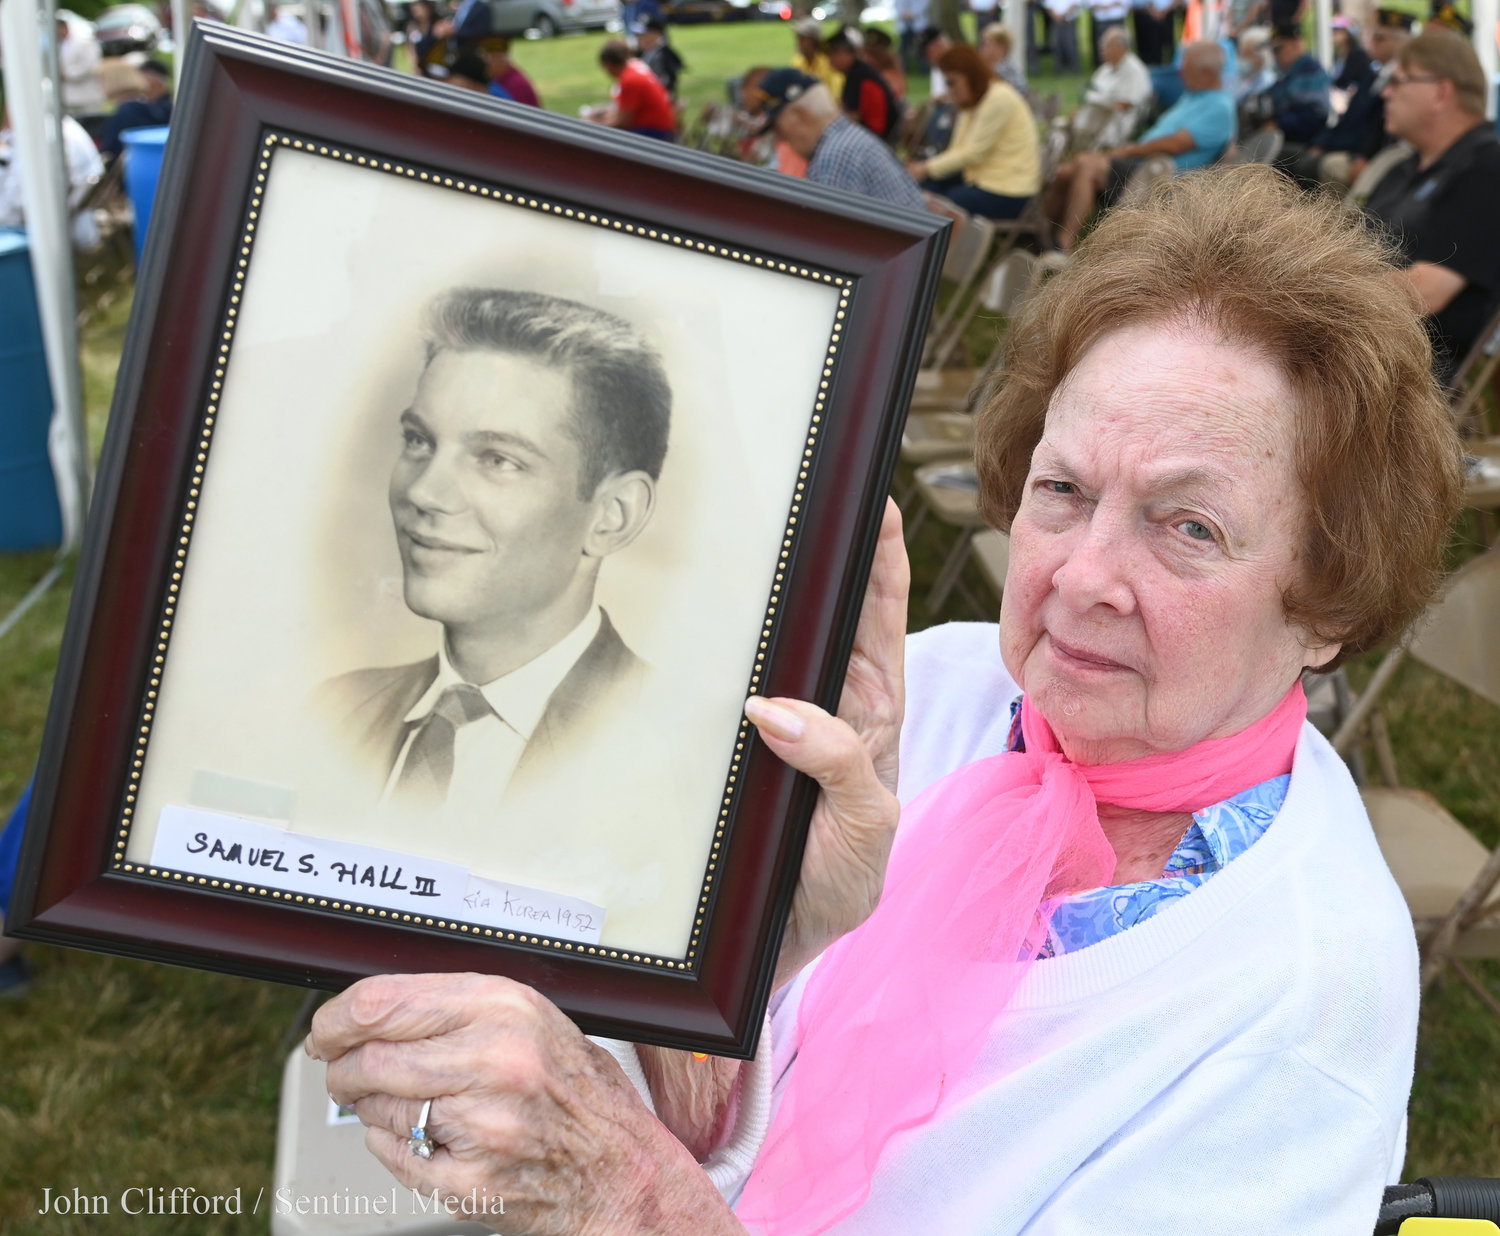 Ann Gambier holds up a framed photo of her first husband Samuel S. Hall III that was killed in action in 1952 in the Korean War.